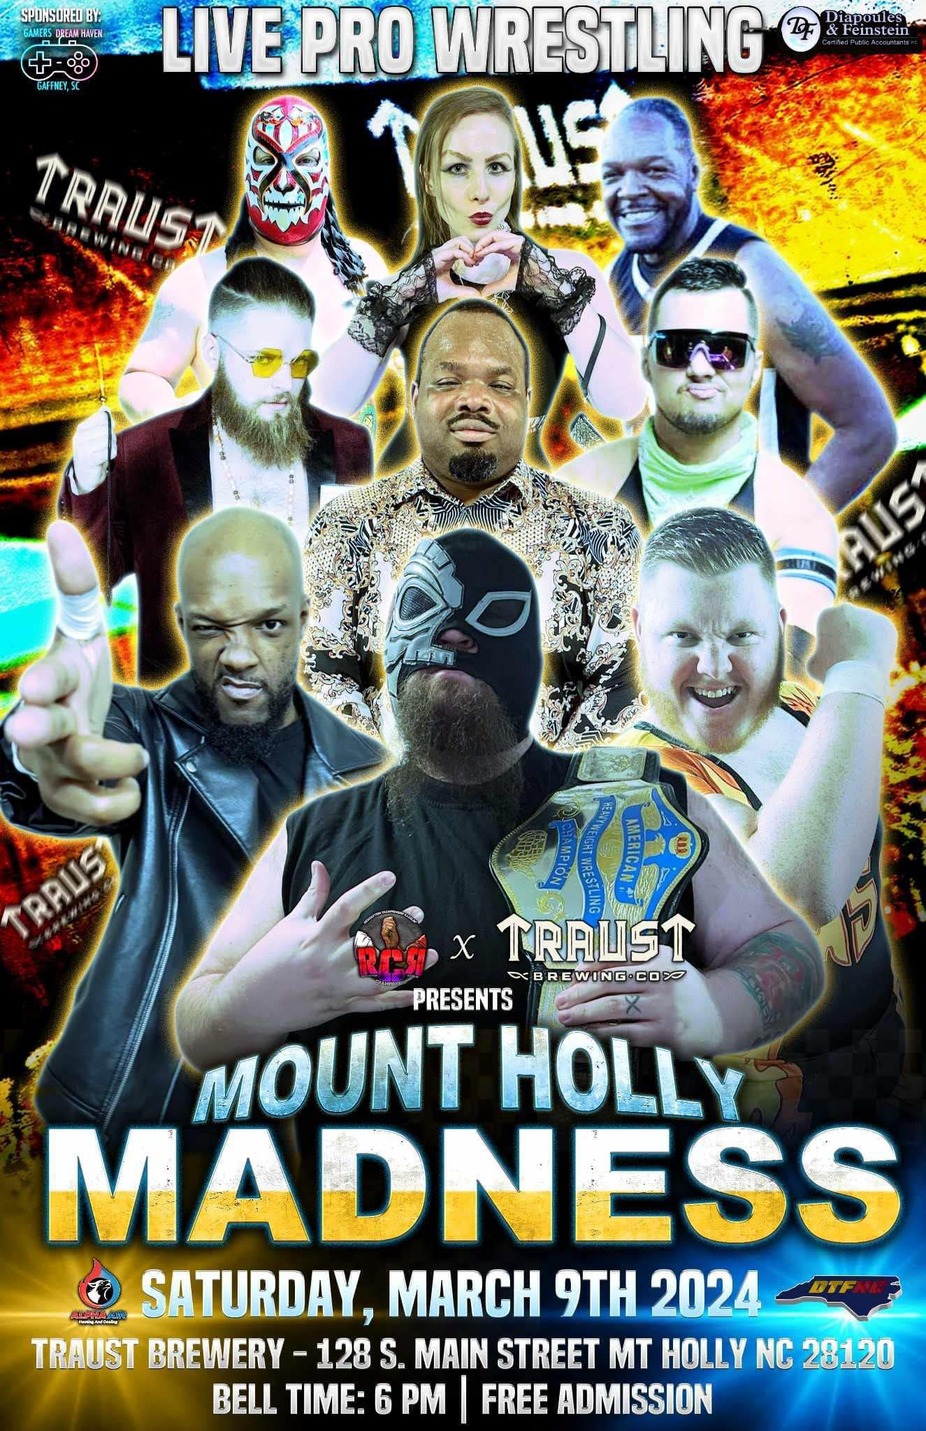 Mount Holly Madness event photo